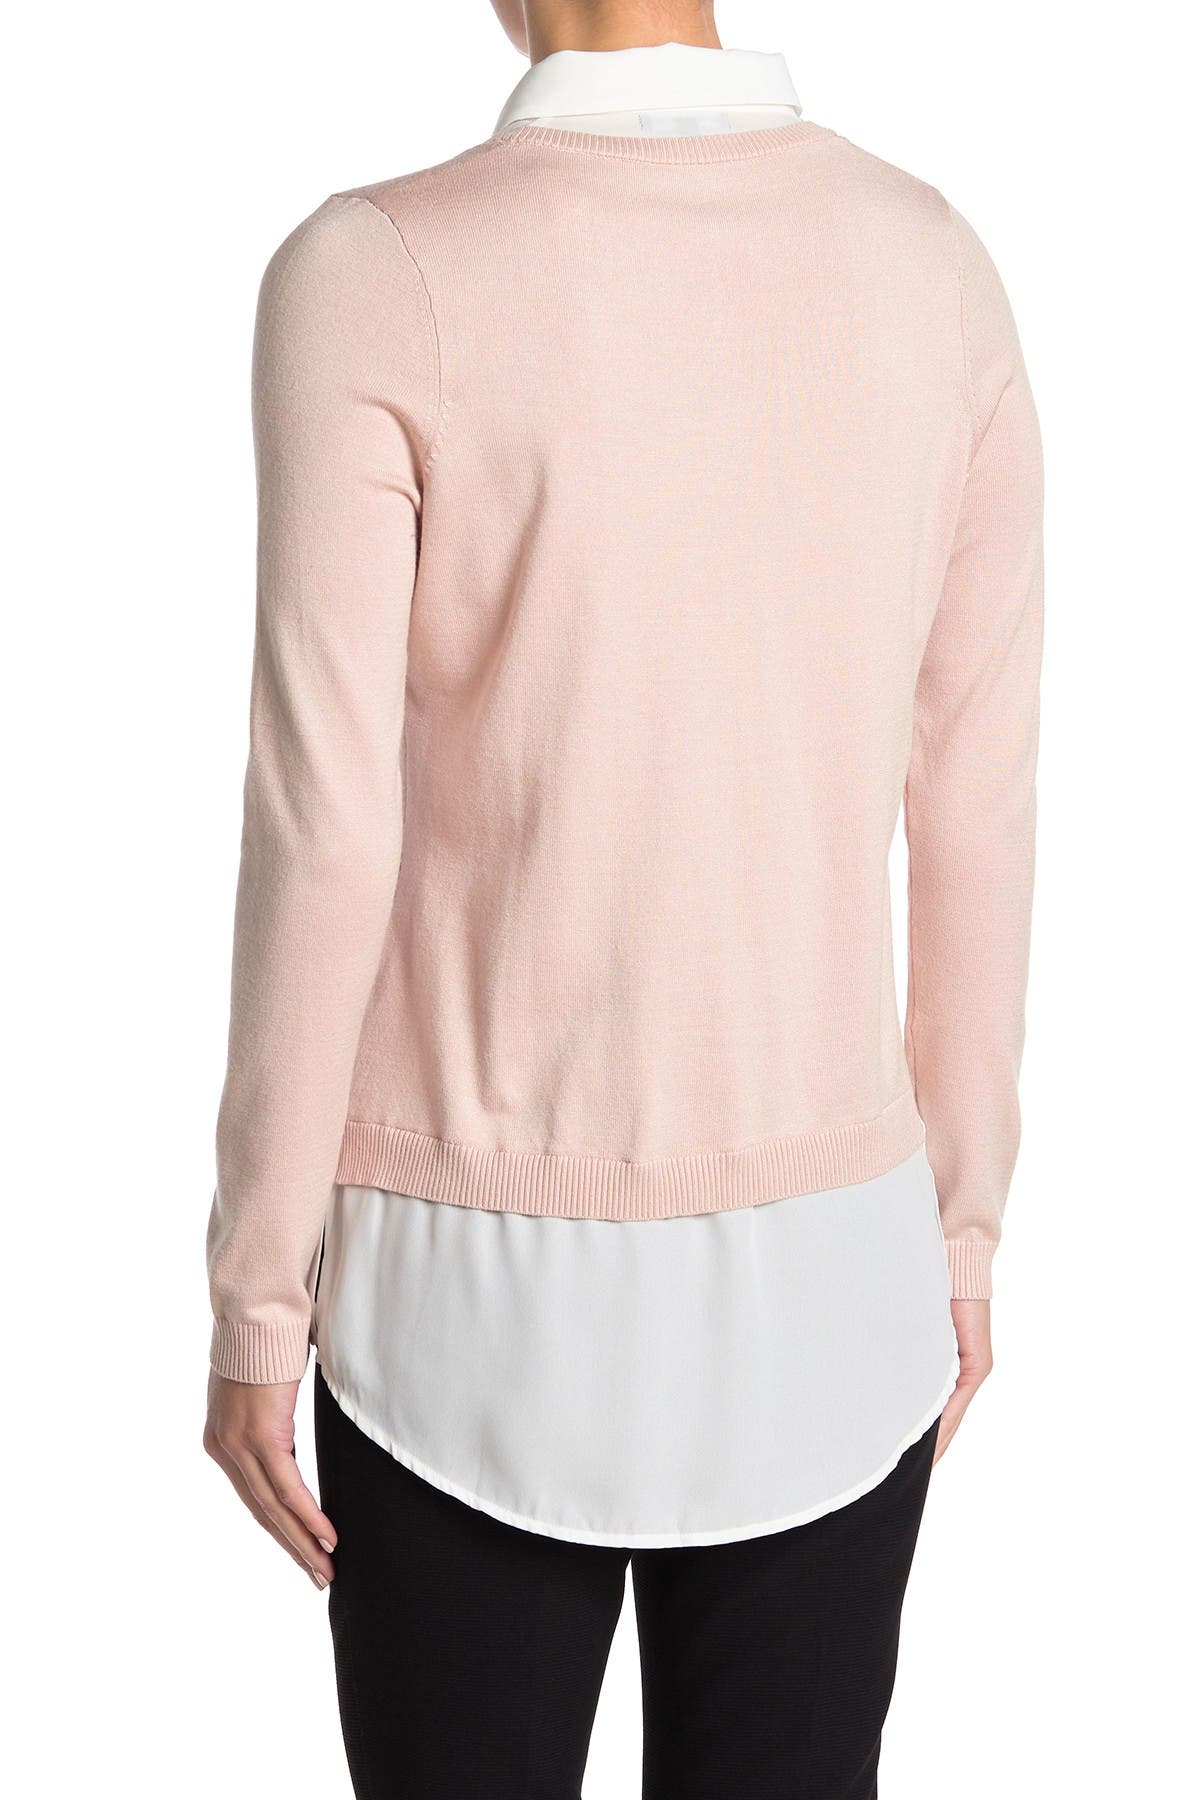 Adrianna Papell V-neck Twofer Sweater In Light/pastel Pink6